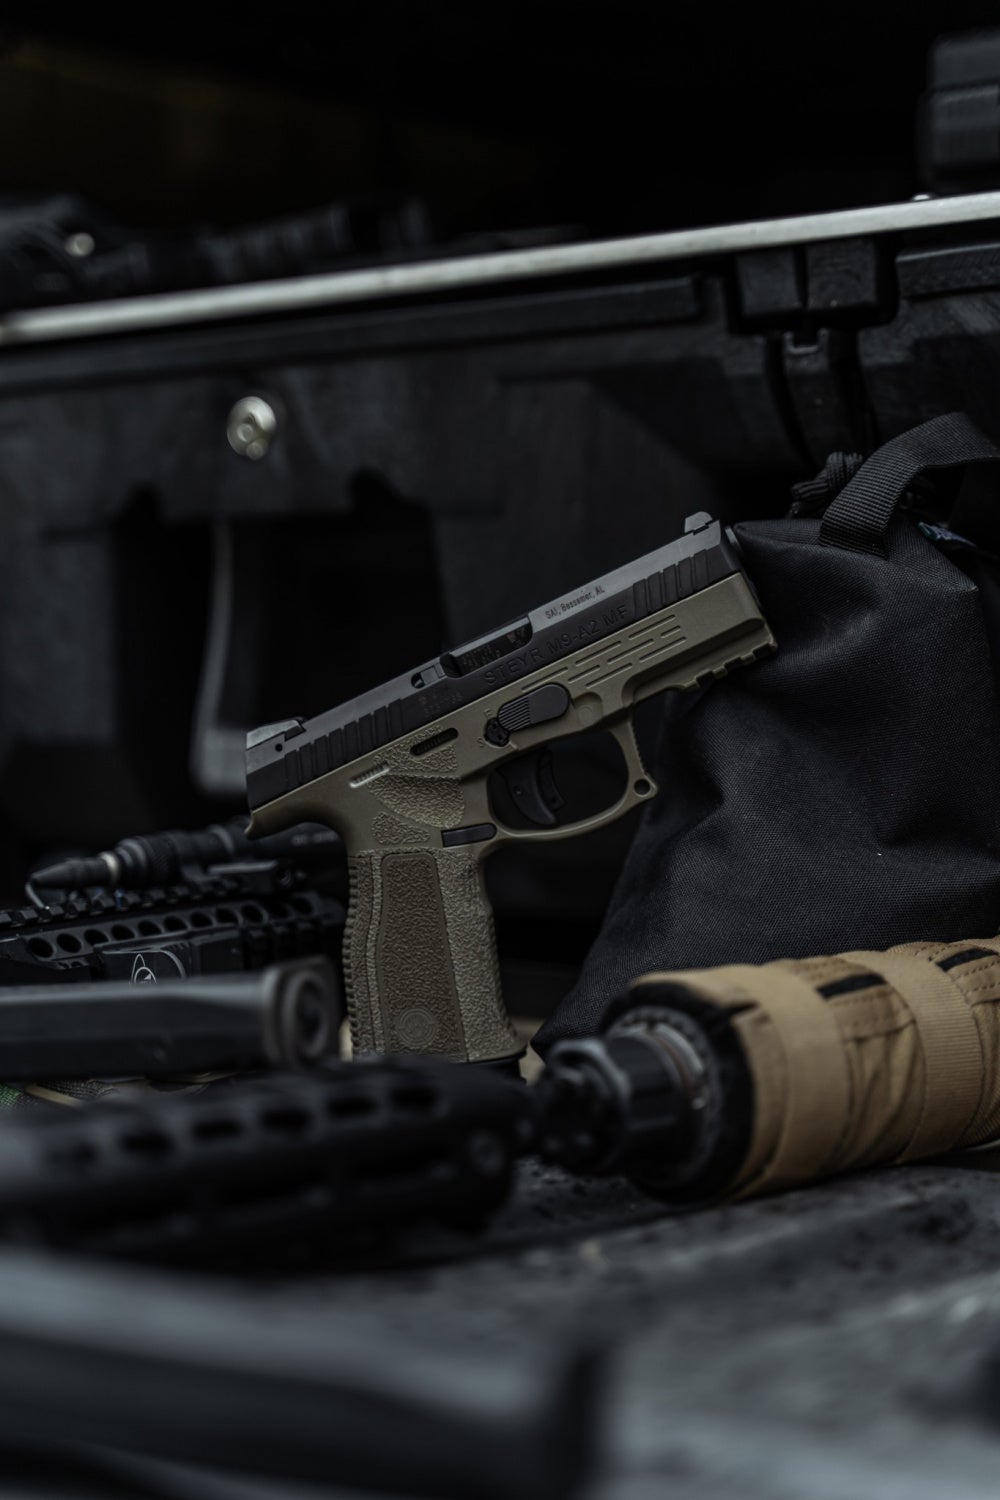 Steyr Arms USA Teases "Green New Deal" M9-A2 MF Pistol Variant